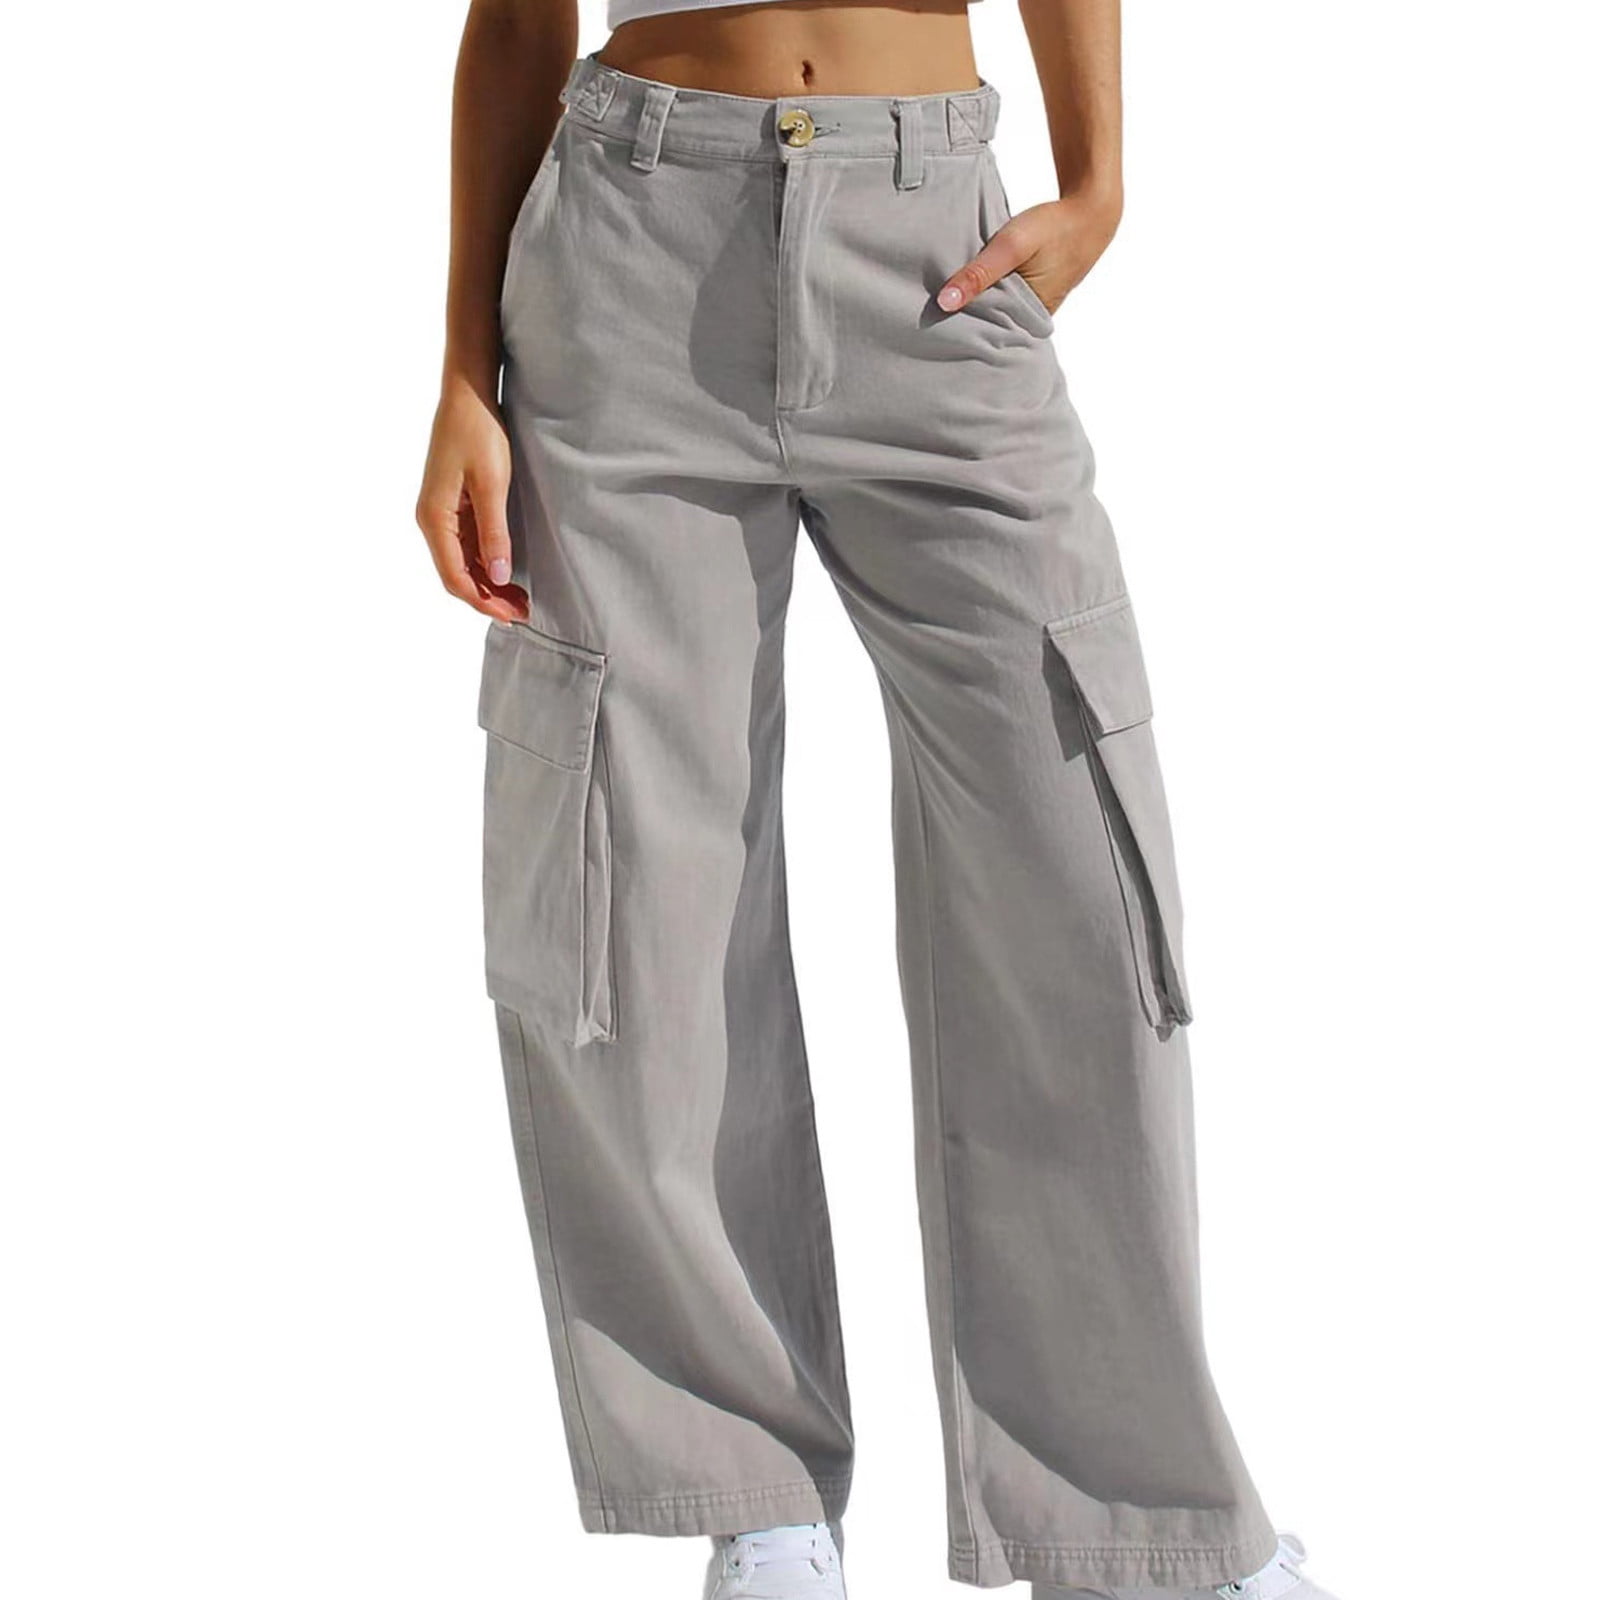 Aueoeo Cargo Pants Women Baggy, Gym Pants for Women Women's Fashion Casual  Solid Elastic Waist Trousers Long Straight Pants